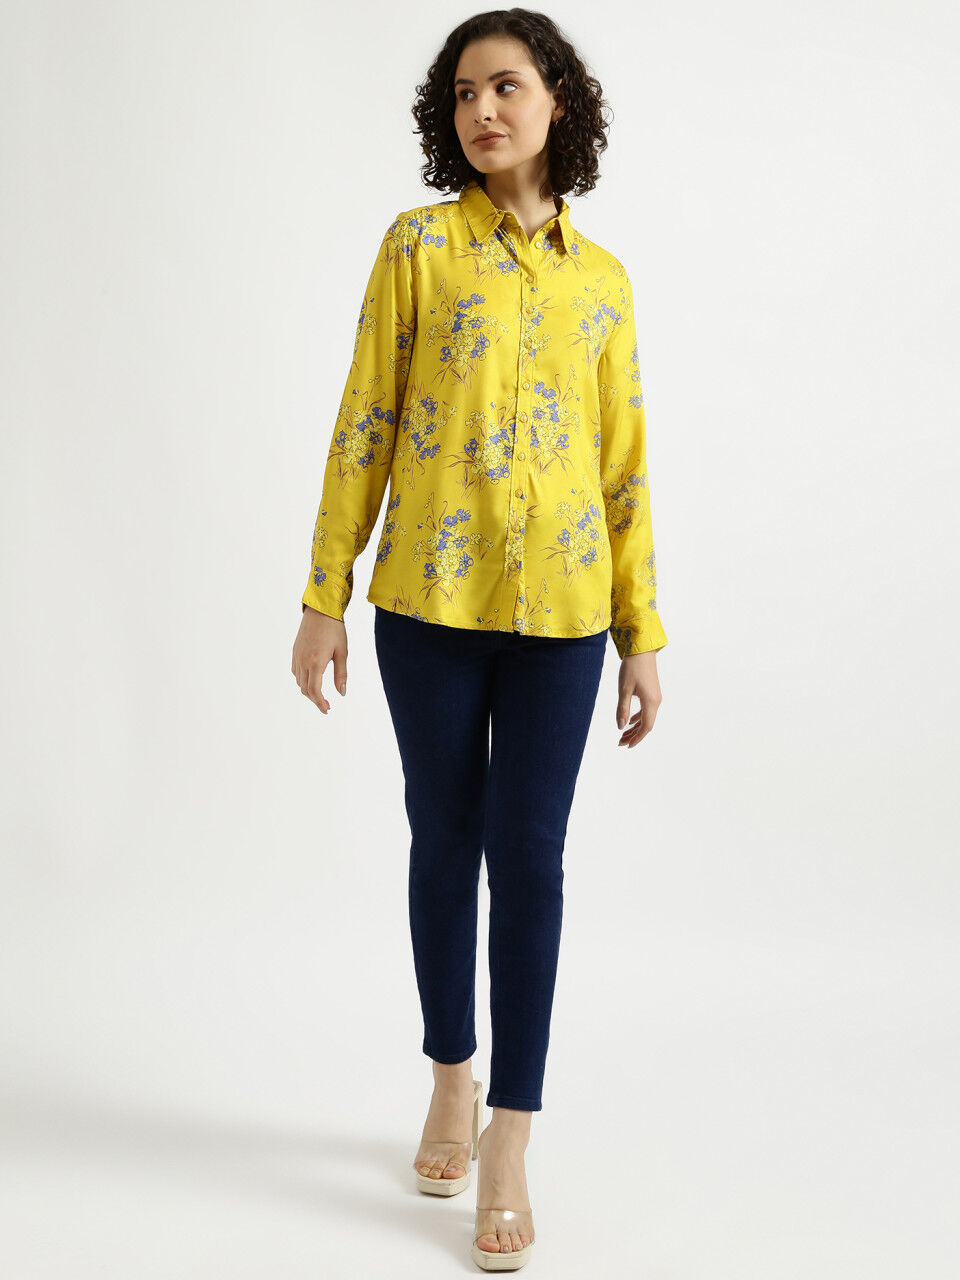 United Colors Of Benetton Ladies Long Sleeve Printed Shirt